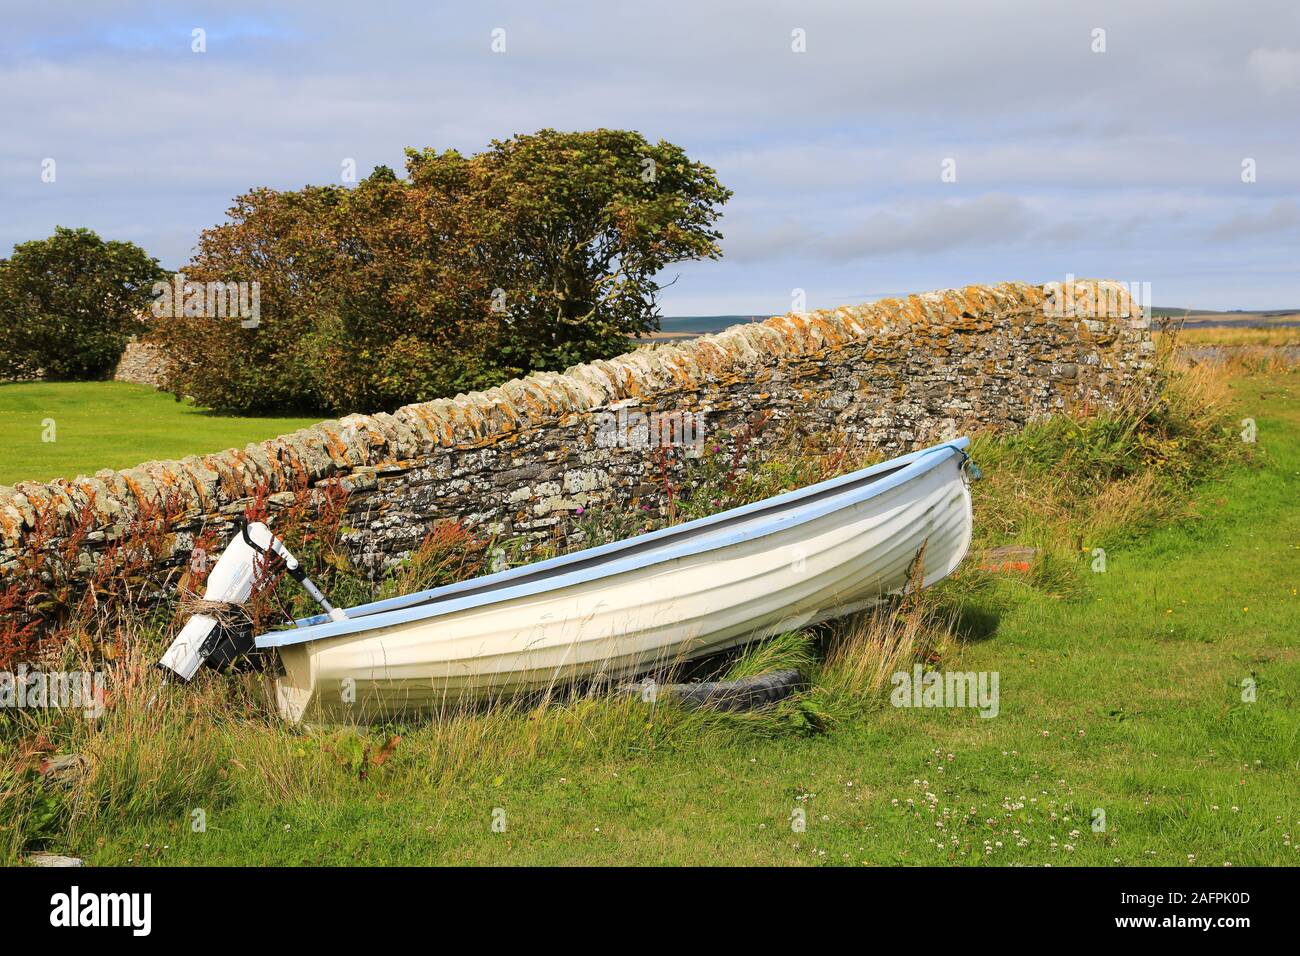 Boat next to stone wall at the Standing Stones Hotel, Stromness, Orkney Islands, United Kingdom Stock Photo